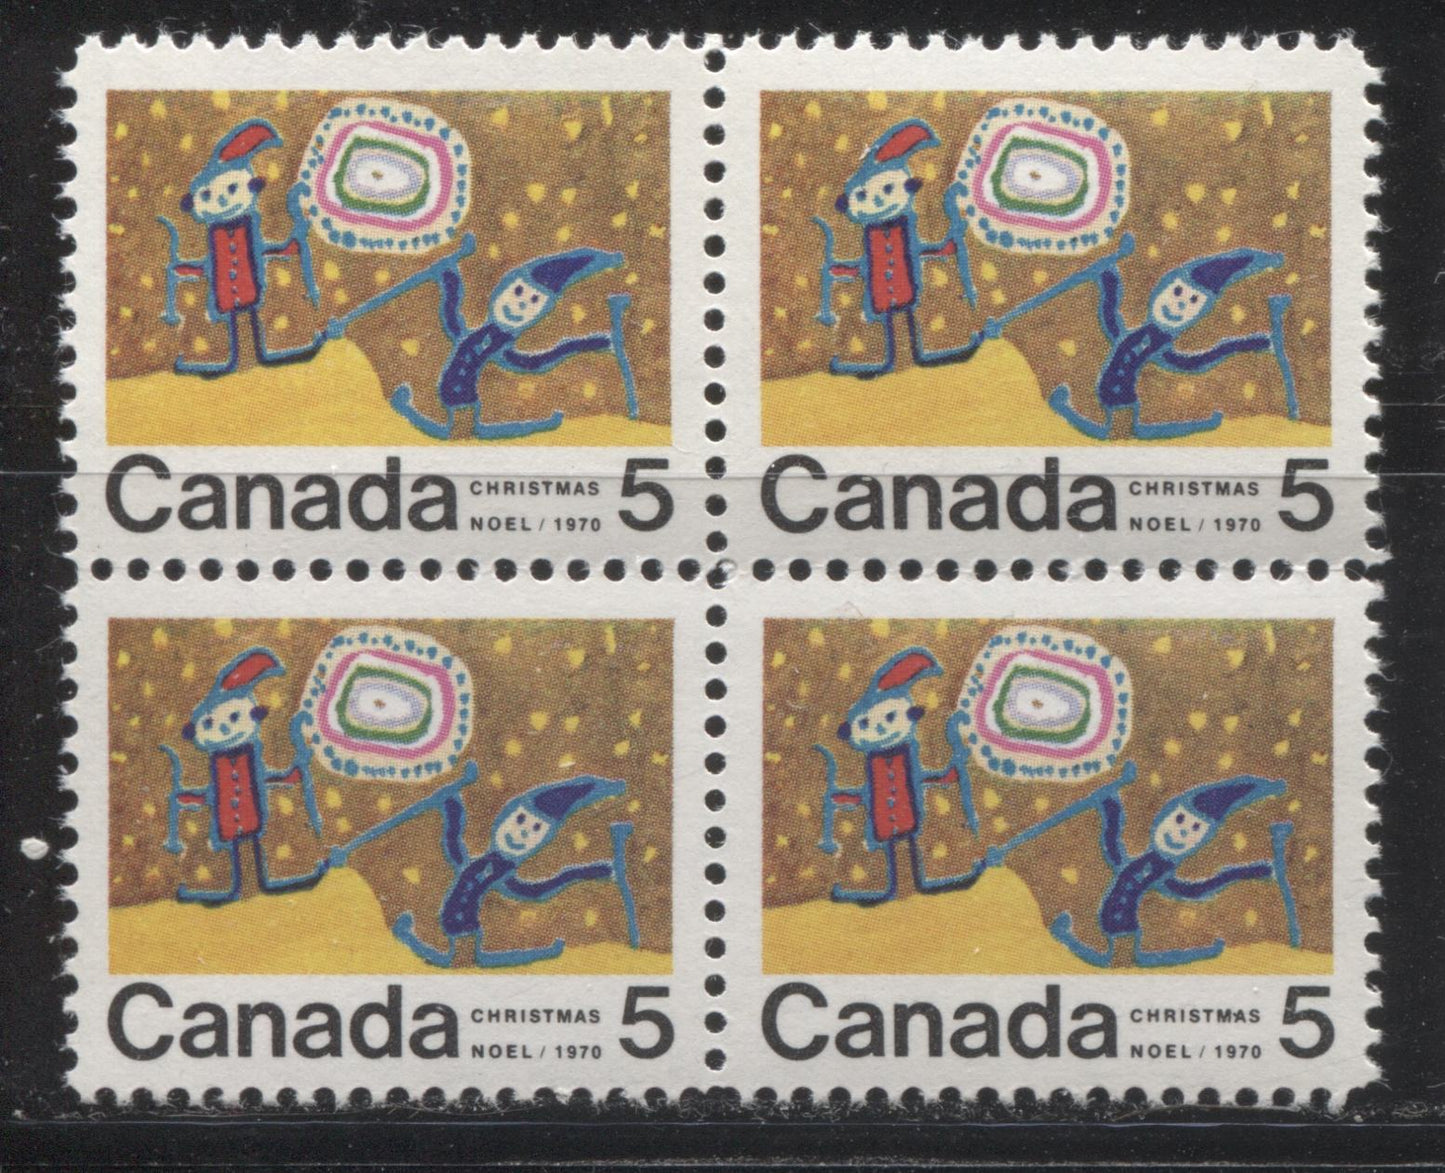 Lot 122 Canada #522i 5c Multicoloured Children Skiing, 1970 Christmas Issue, a VFNH Centre Block of 4 on HB11 Ribbed Paper, With Dot Between "MA" of "Christmas" on LR Stamp, Perf. 11.85 x 11.95